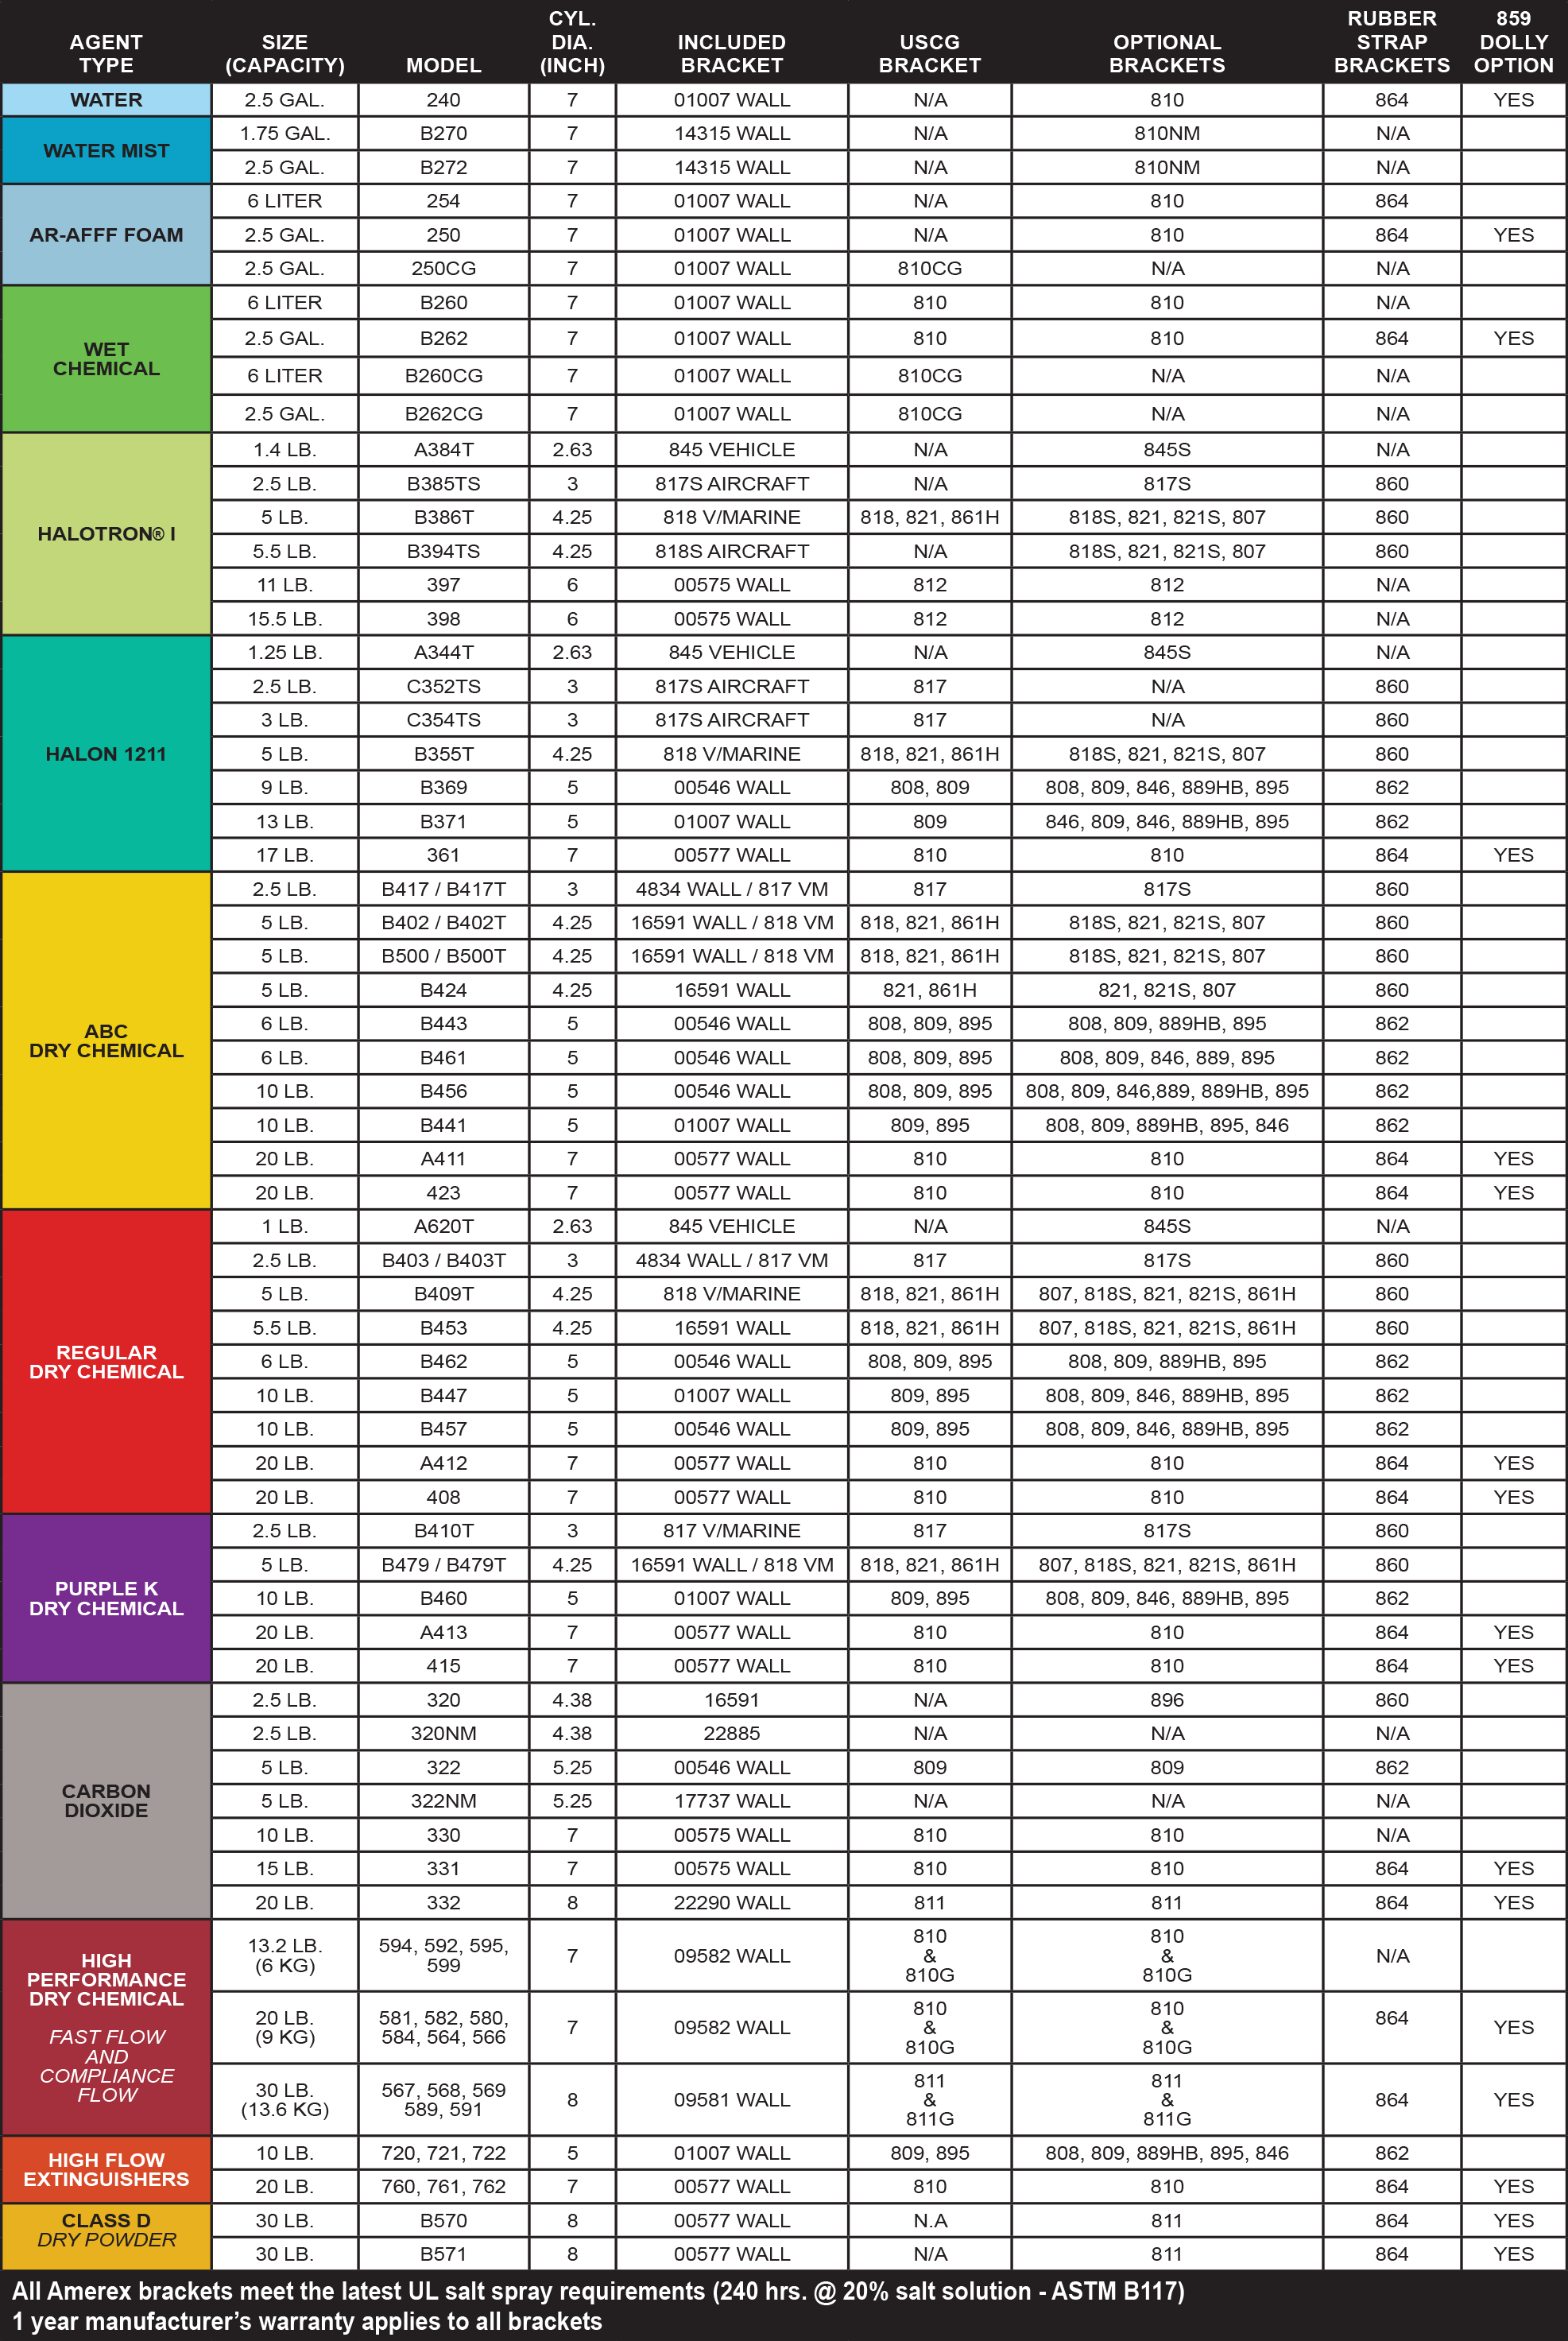 Bracket Reference Guide